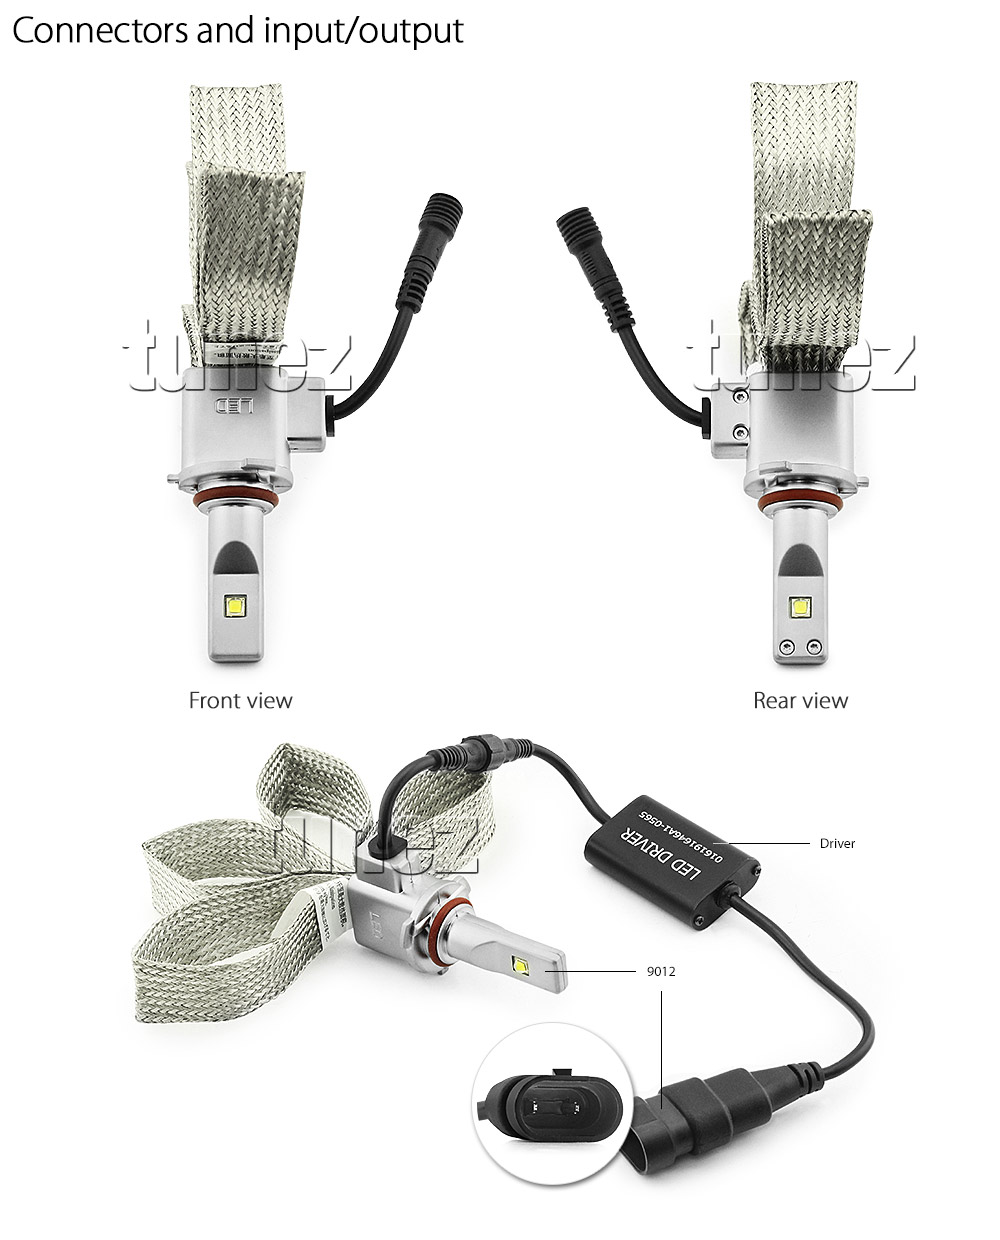 LEDLW9012 LEDway LED HIR2 9012 PX22d XLamp XM-L2 by CREE Light Lamp Bulb Headlight Headlamp Head UK United Kingdom USA Australia Europe High Beam Low Hi Lo 5700K Daylight Colour Color Bright White Copper Braided Extra Wide Flexible Heat Sink Waterproof Dustproof 6063 Aluminium Alloy IP65 External Driver Detachable 3-Year Warranty 36-months Direct Replacement Conversion Kit For Halogen and Xenon 5200lm 5200 lumens 30W 60W 120W 20800lm 20800 10400 10400lm